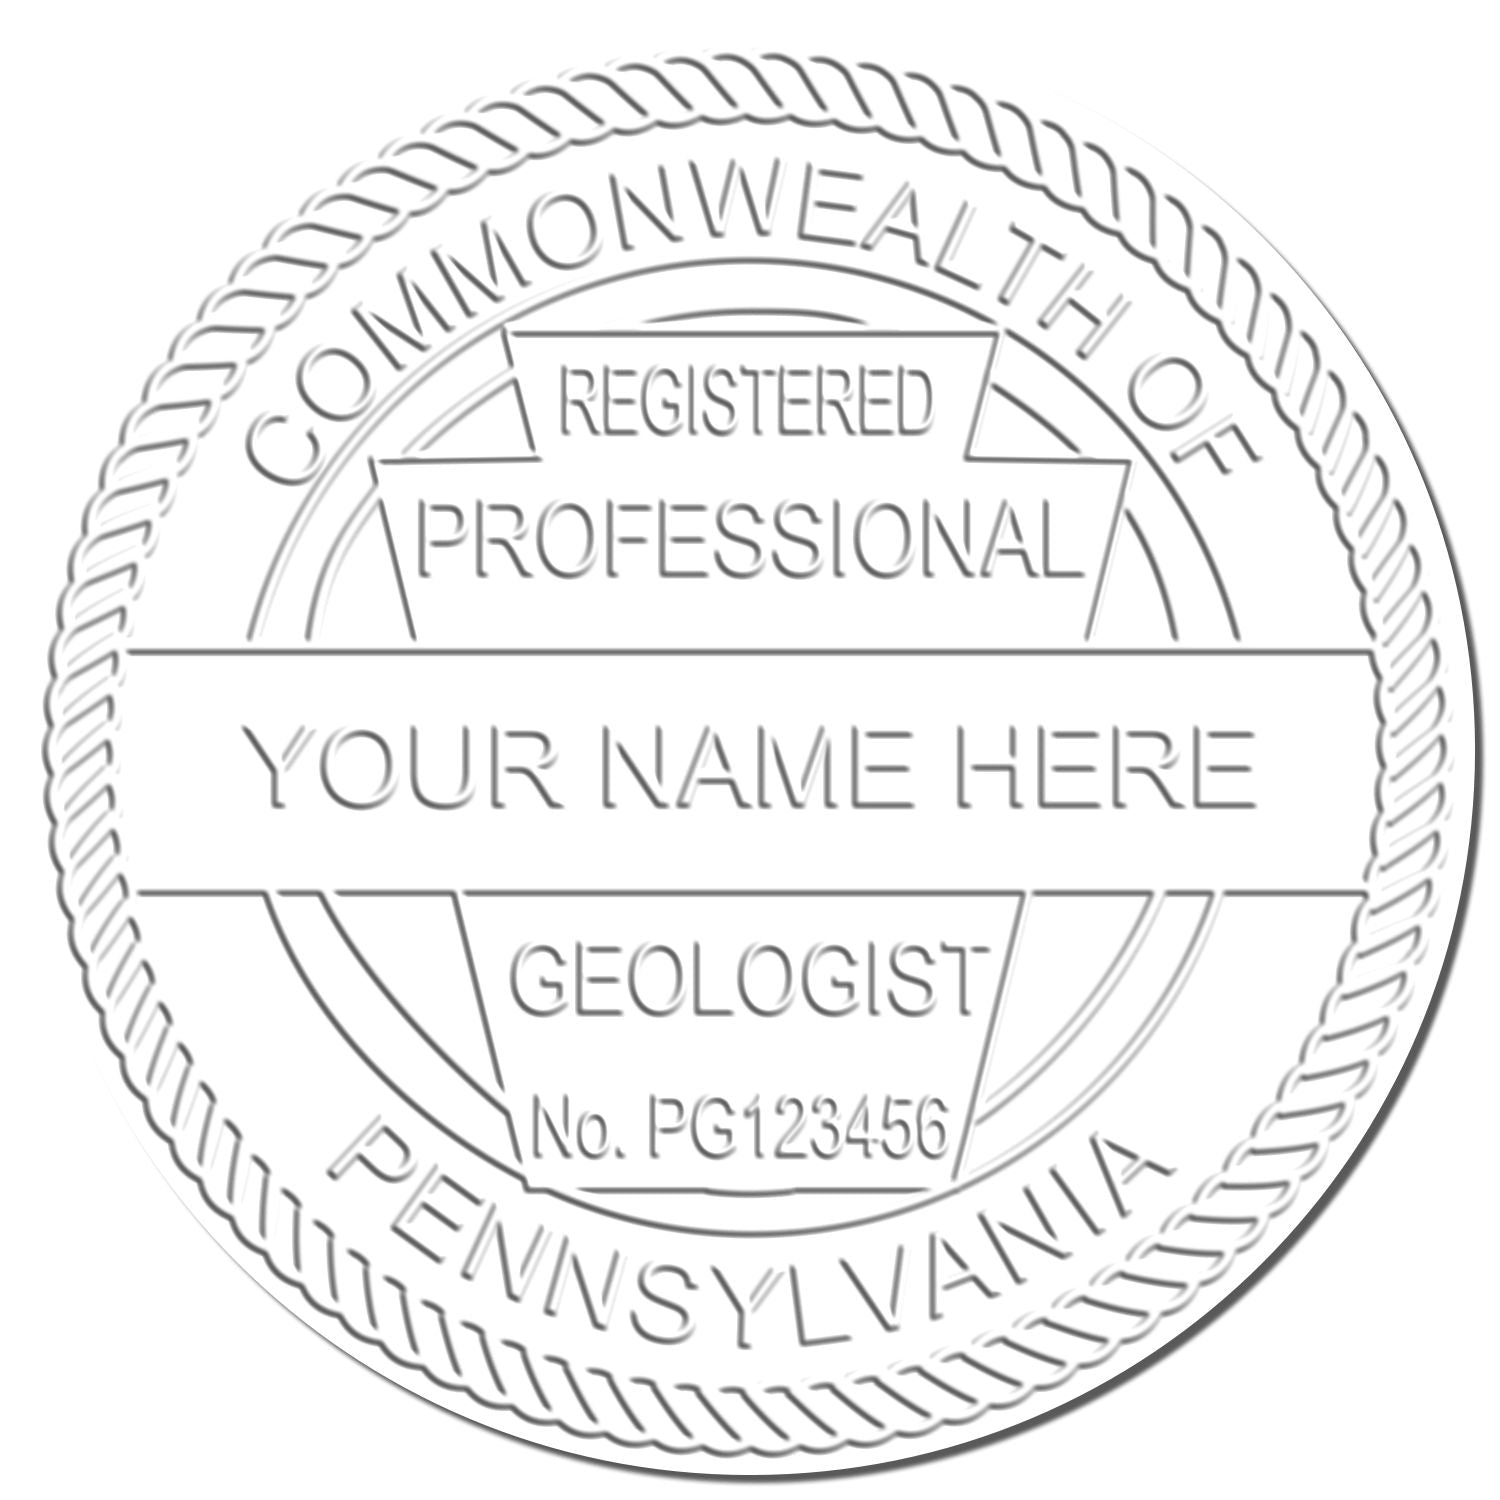 The main image for the Pennsylvania Geologist Desk Seal depicting a sample of the imprint and imprint sample